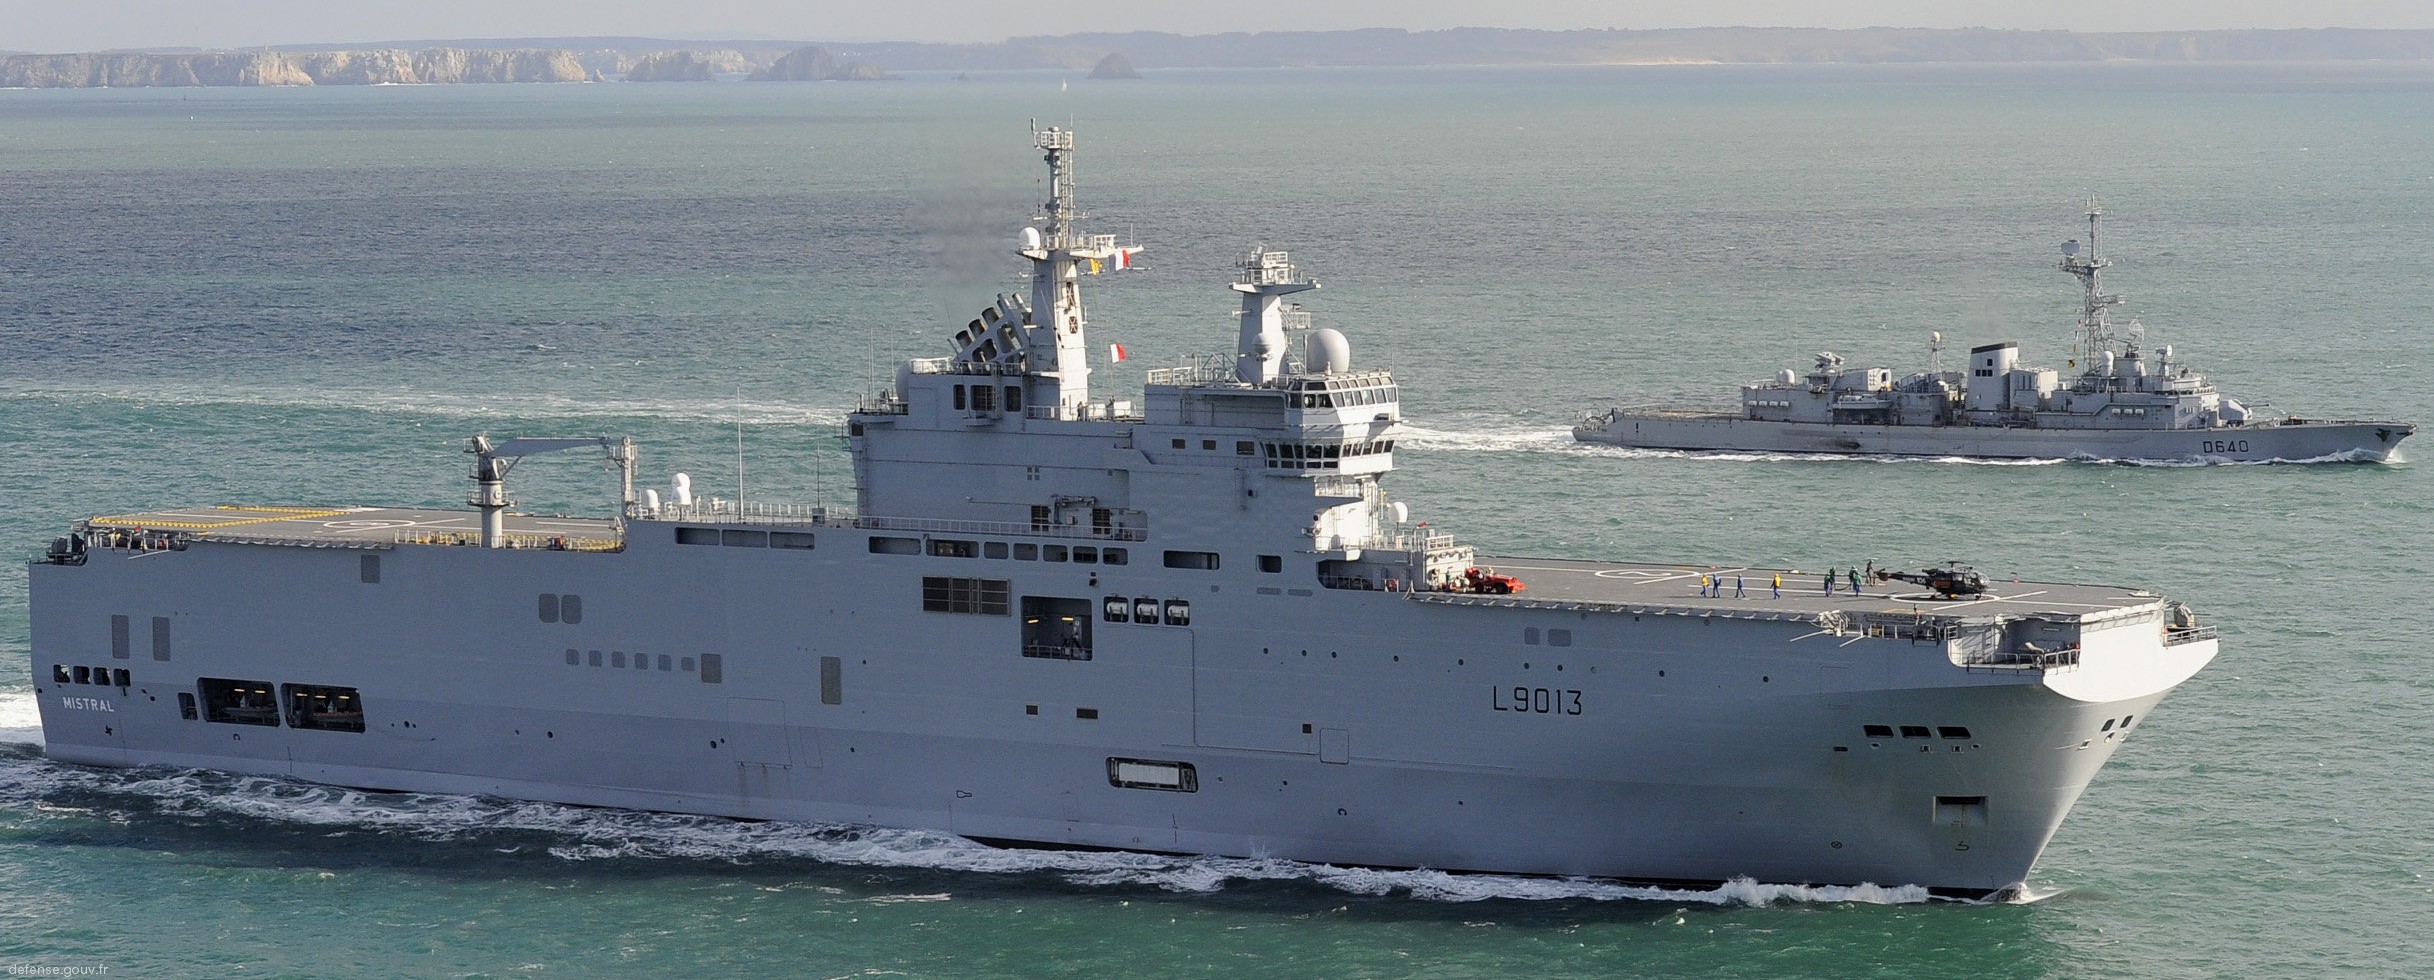 l-9013 fs mistral amphibious assault command ship french navy marine nationale 24